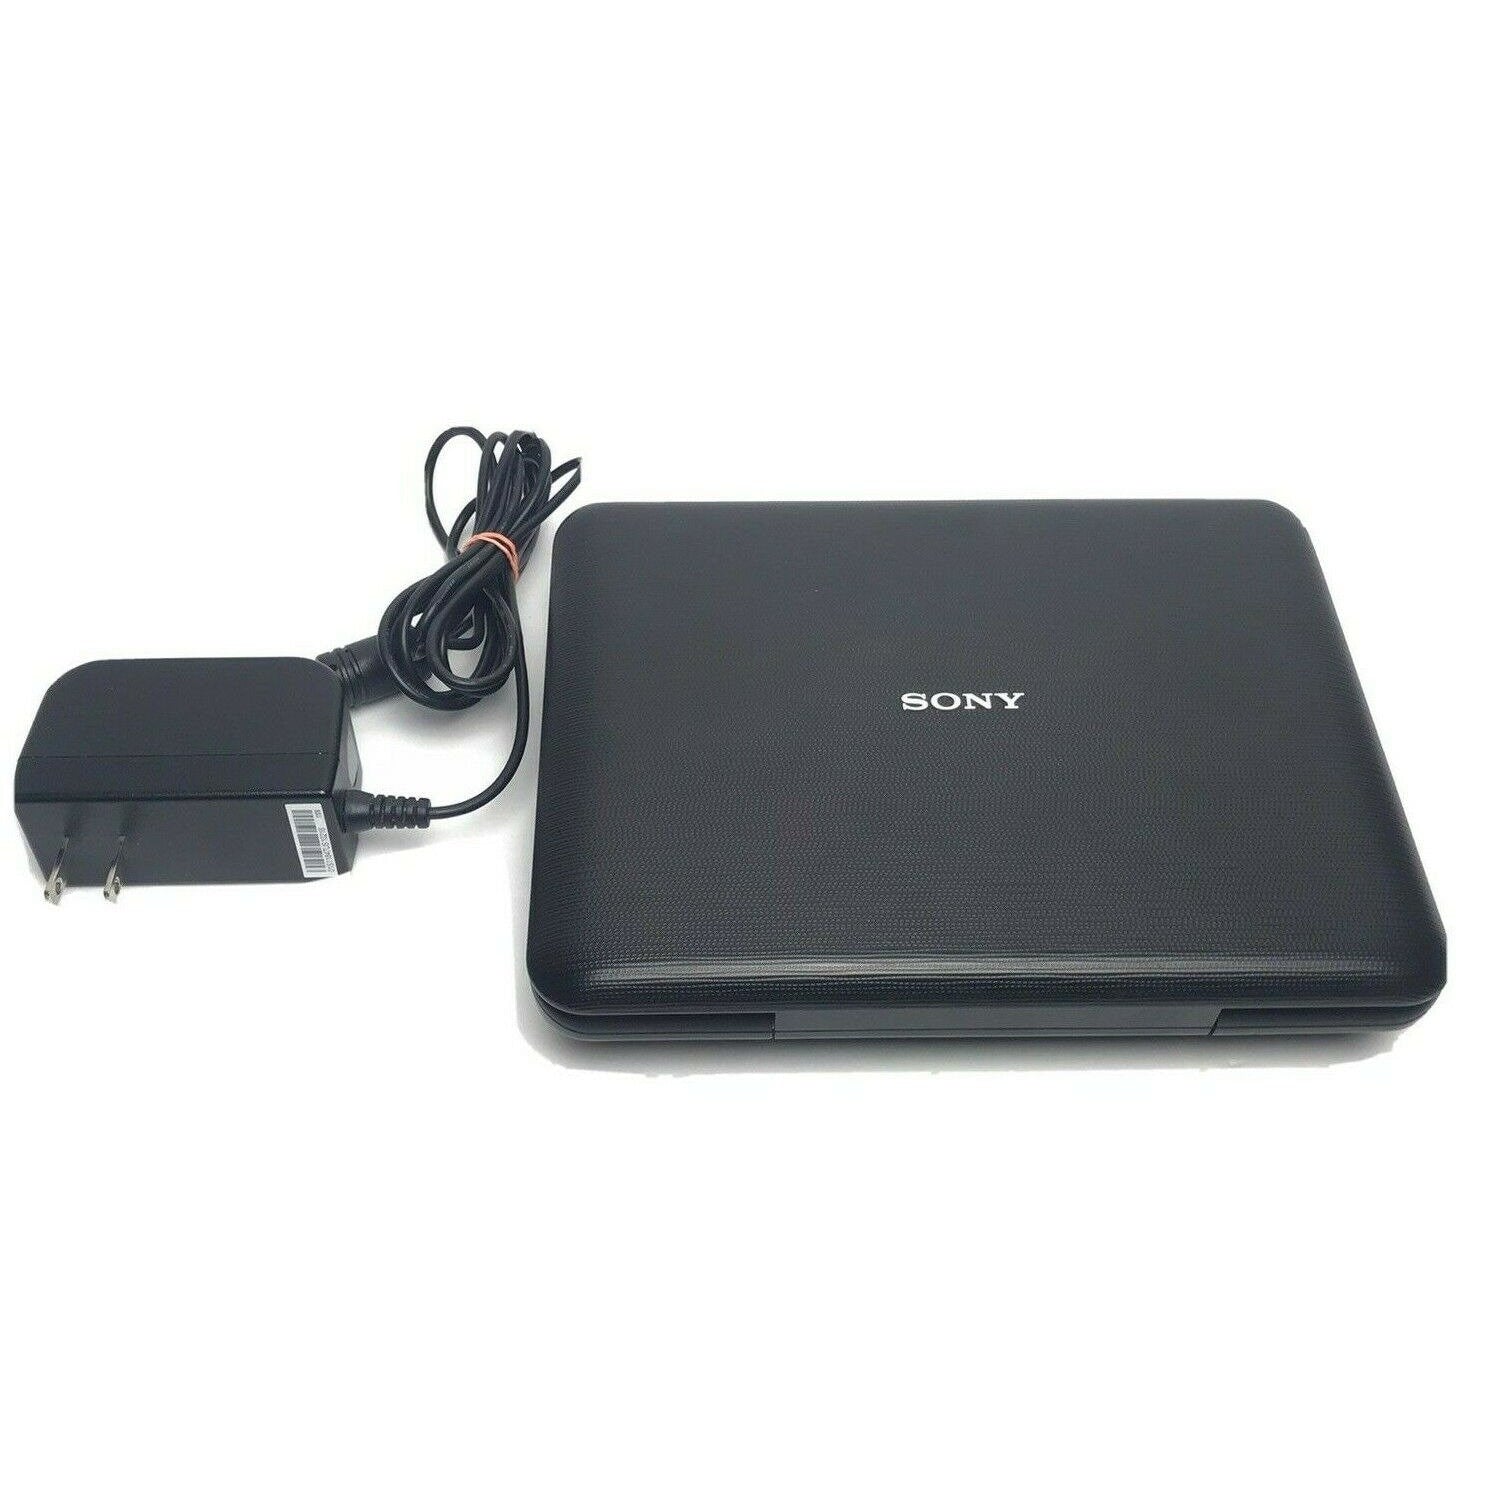 Sony DVP-FX750 Portable Travel CD & DVD Player with Original Charger